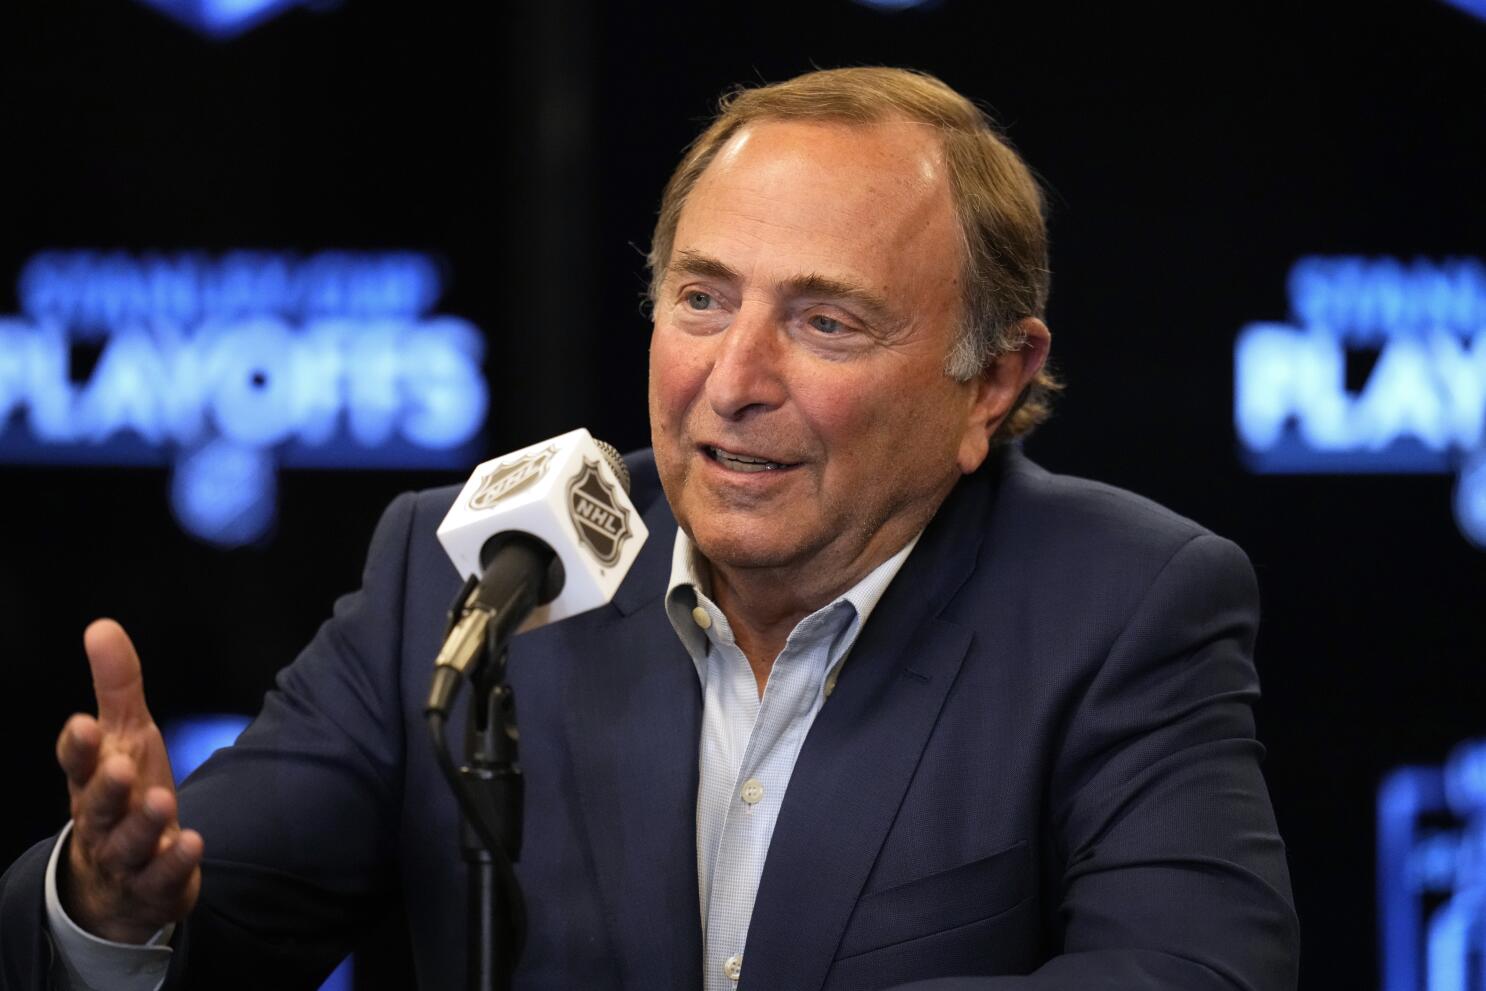 NHL loses brand value after lockout: study